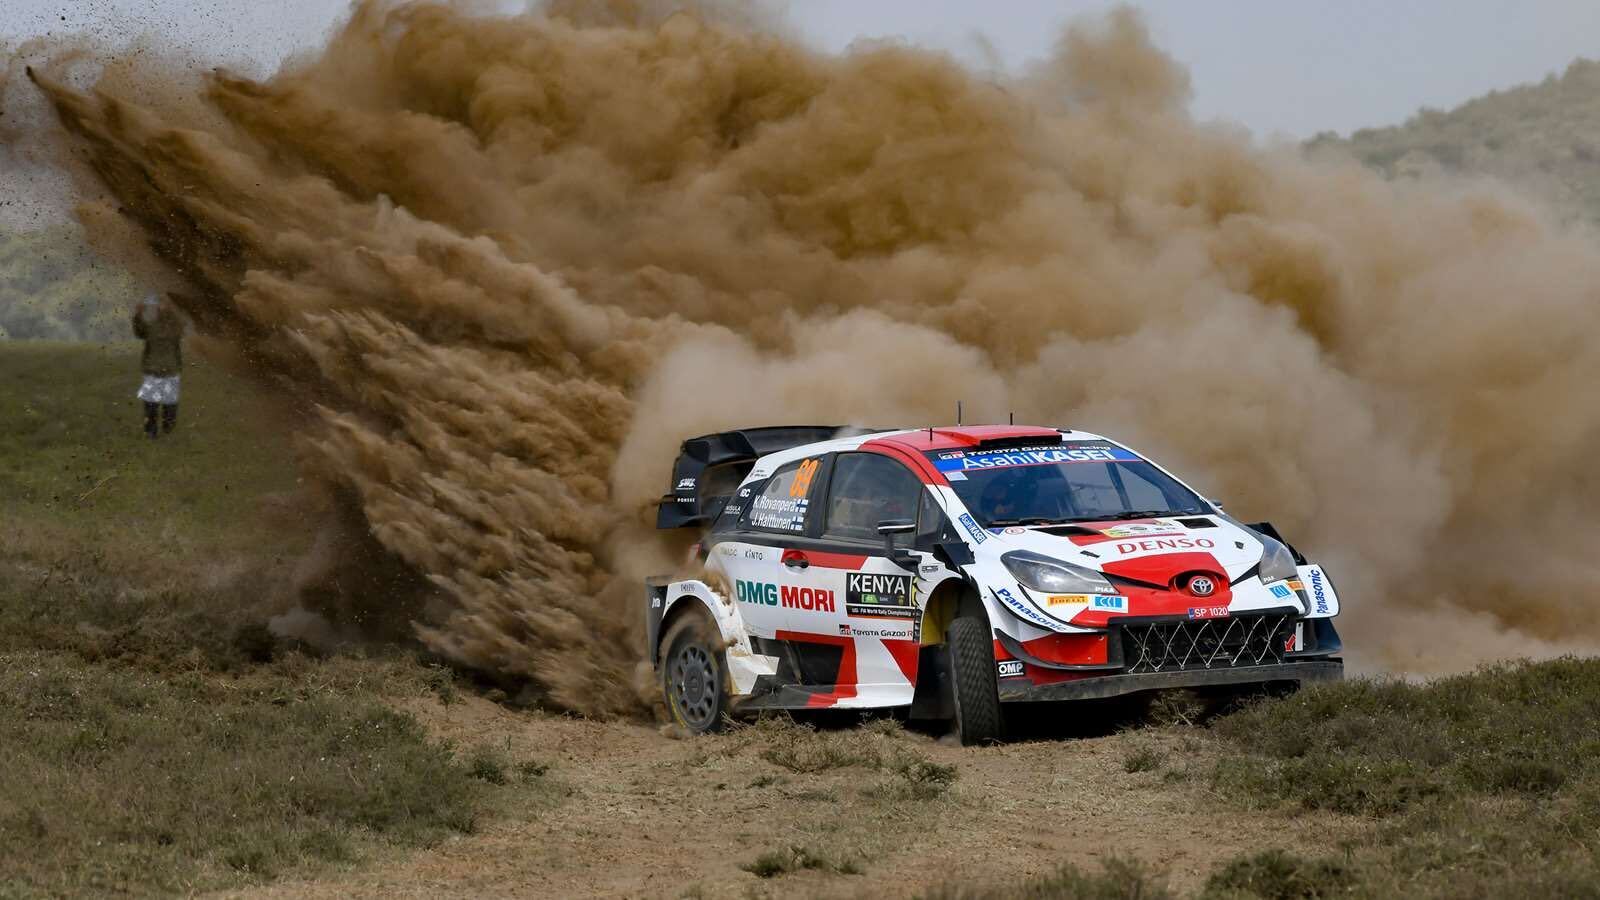 WRC Safari Rally places fans’ enjoyment, safety as top priority